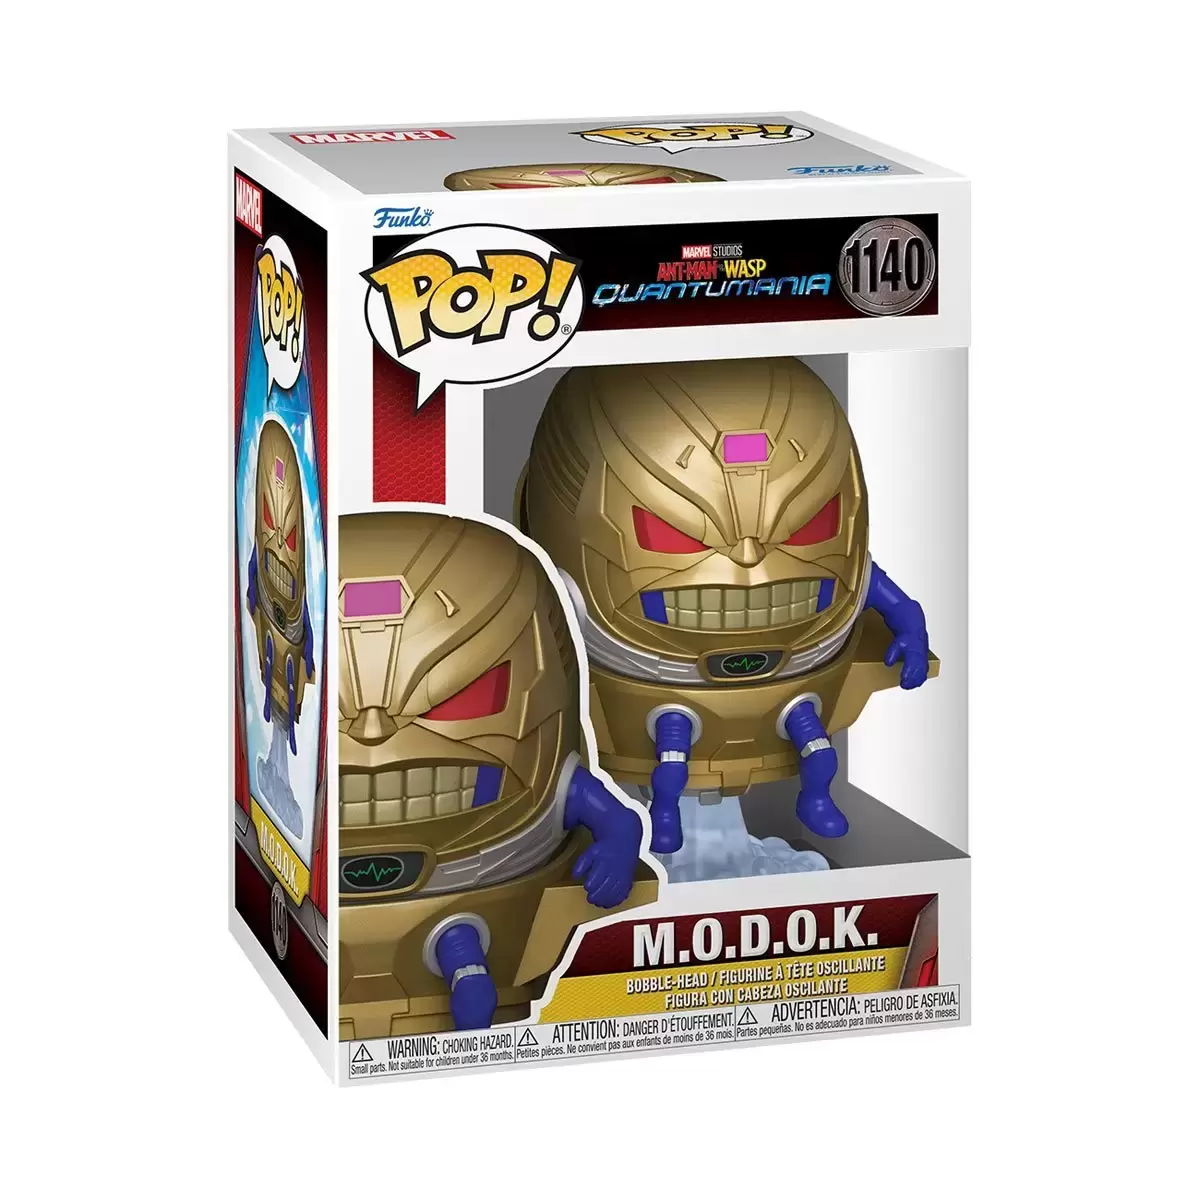 POP! MARVEL - Ant-Man and the Wasp - M.O.D.O.K